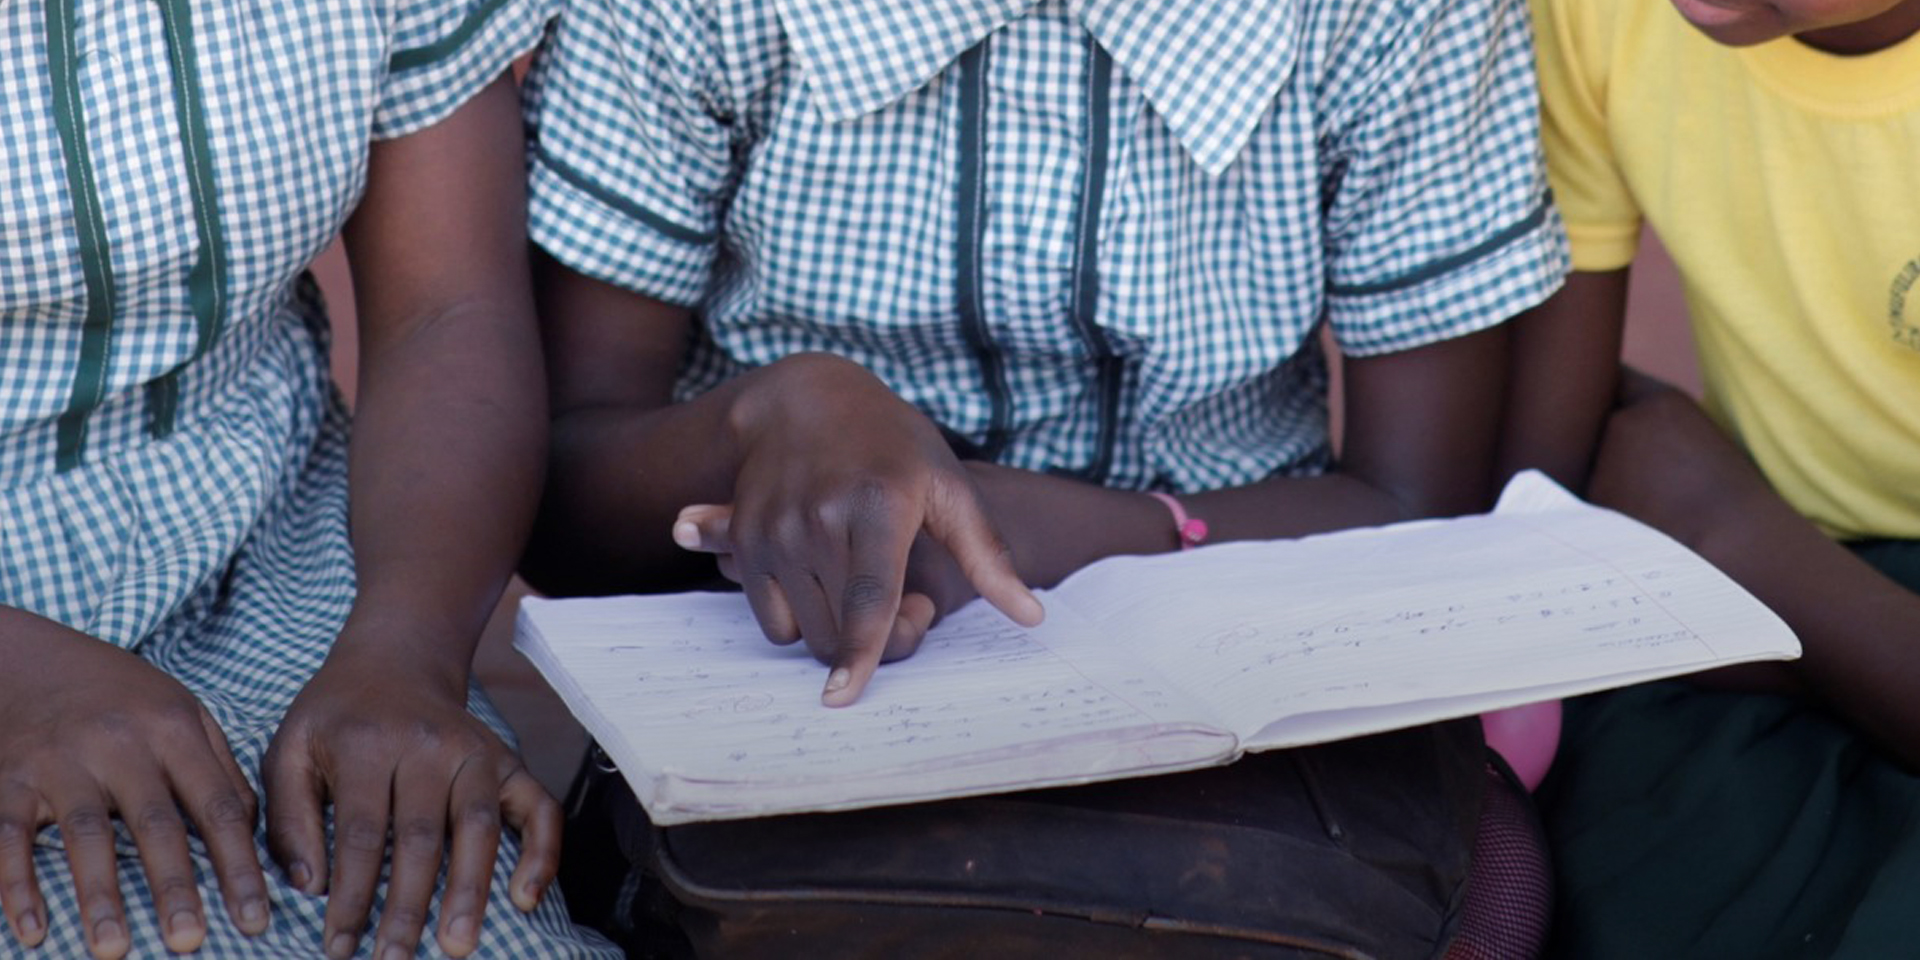 A close-up image of three children reading a notebook together.